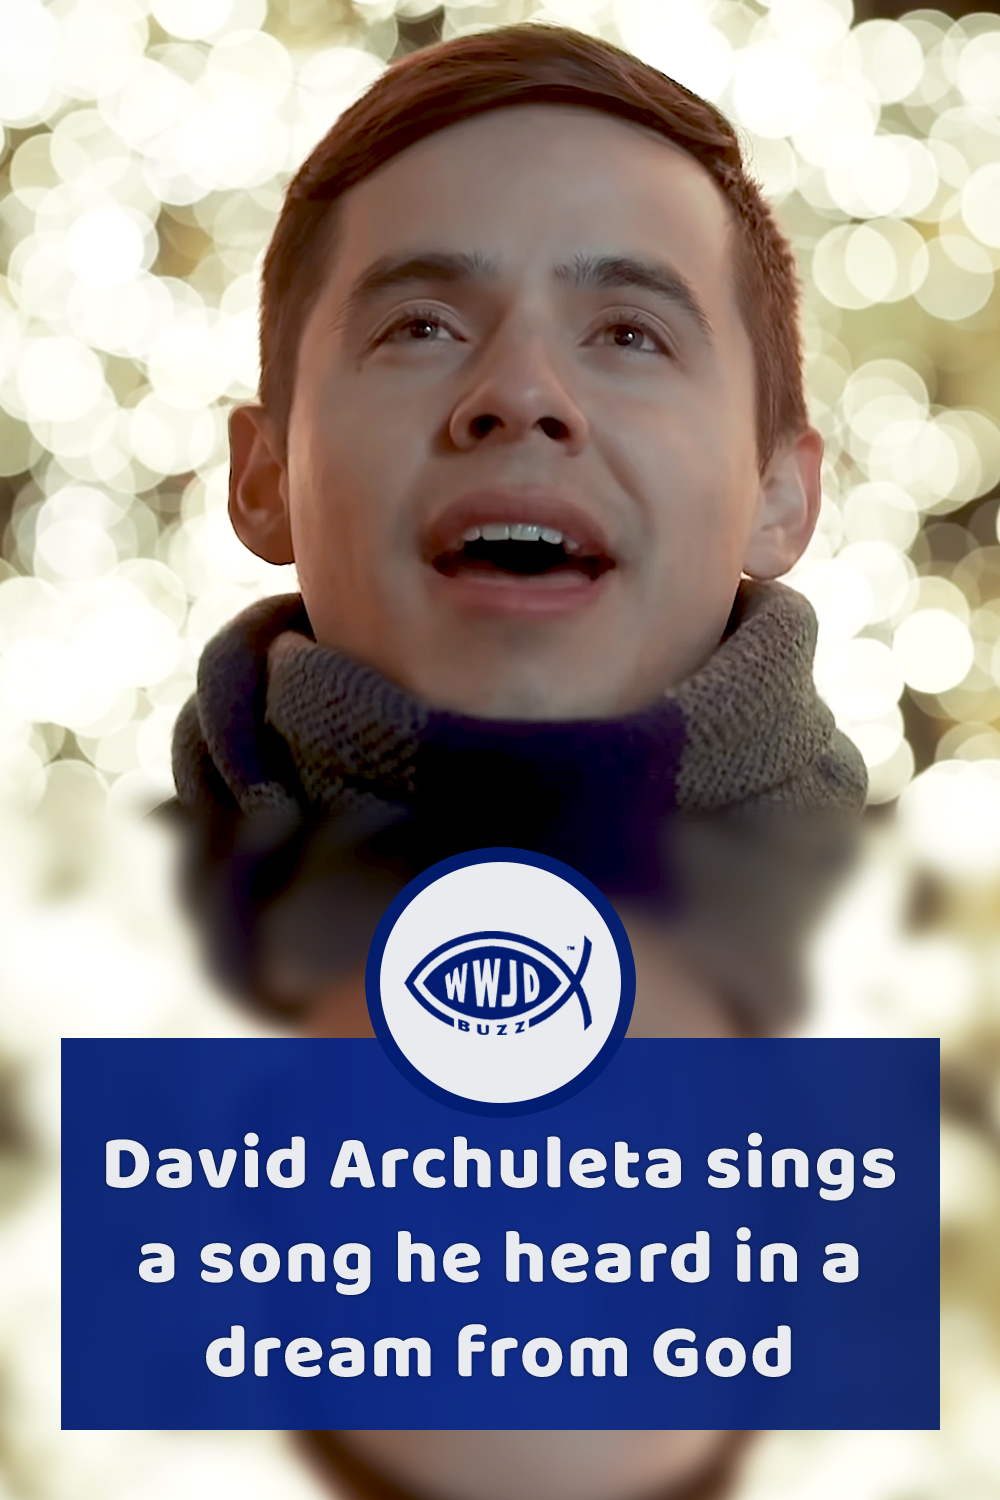 David Archuleta sings a song he heard in a dream from God